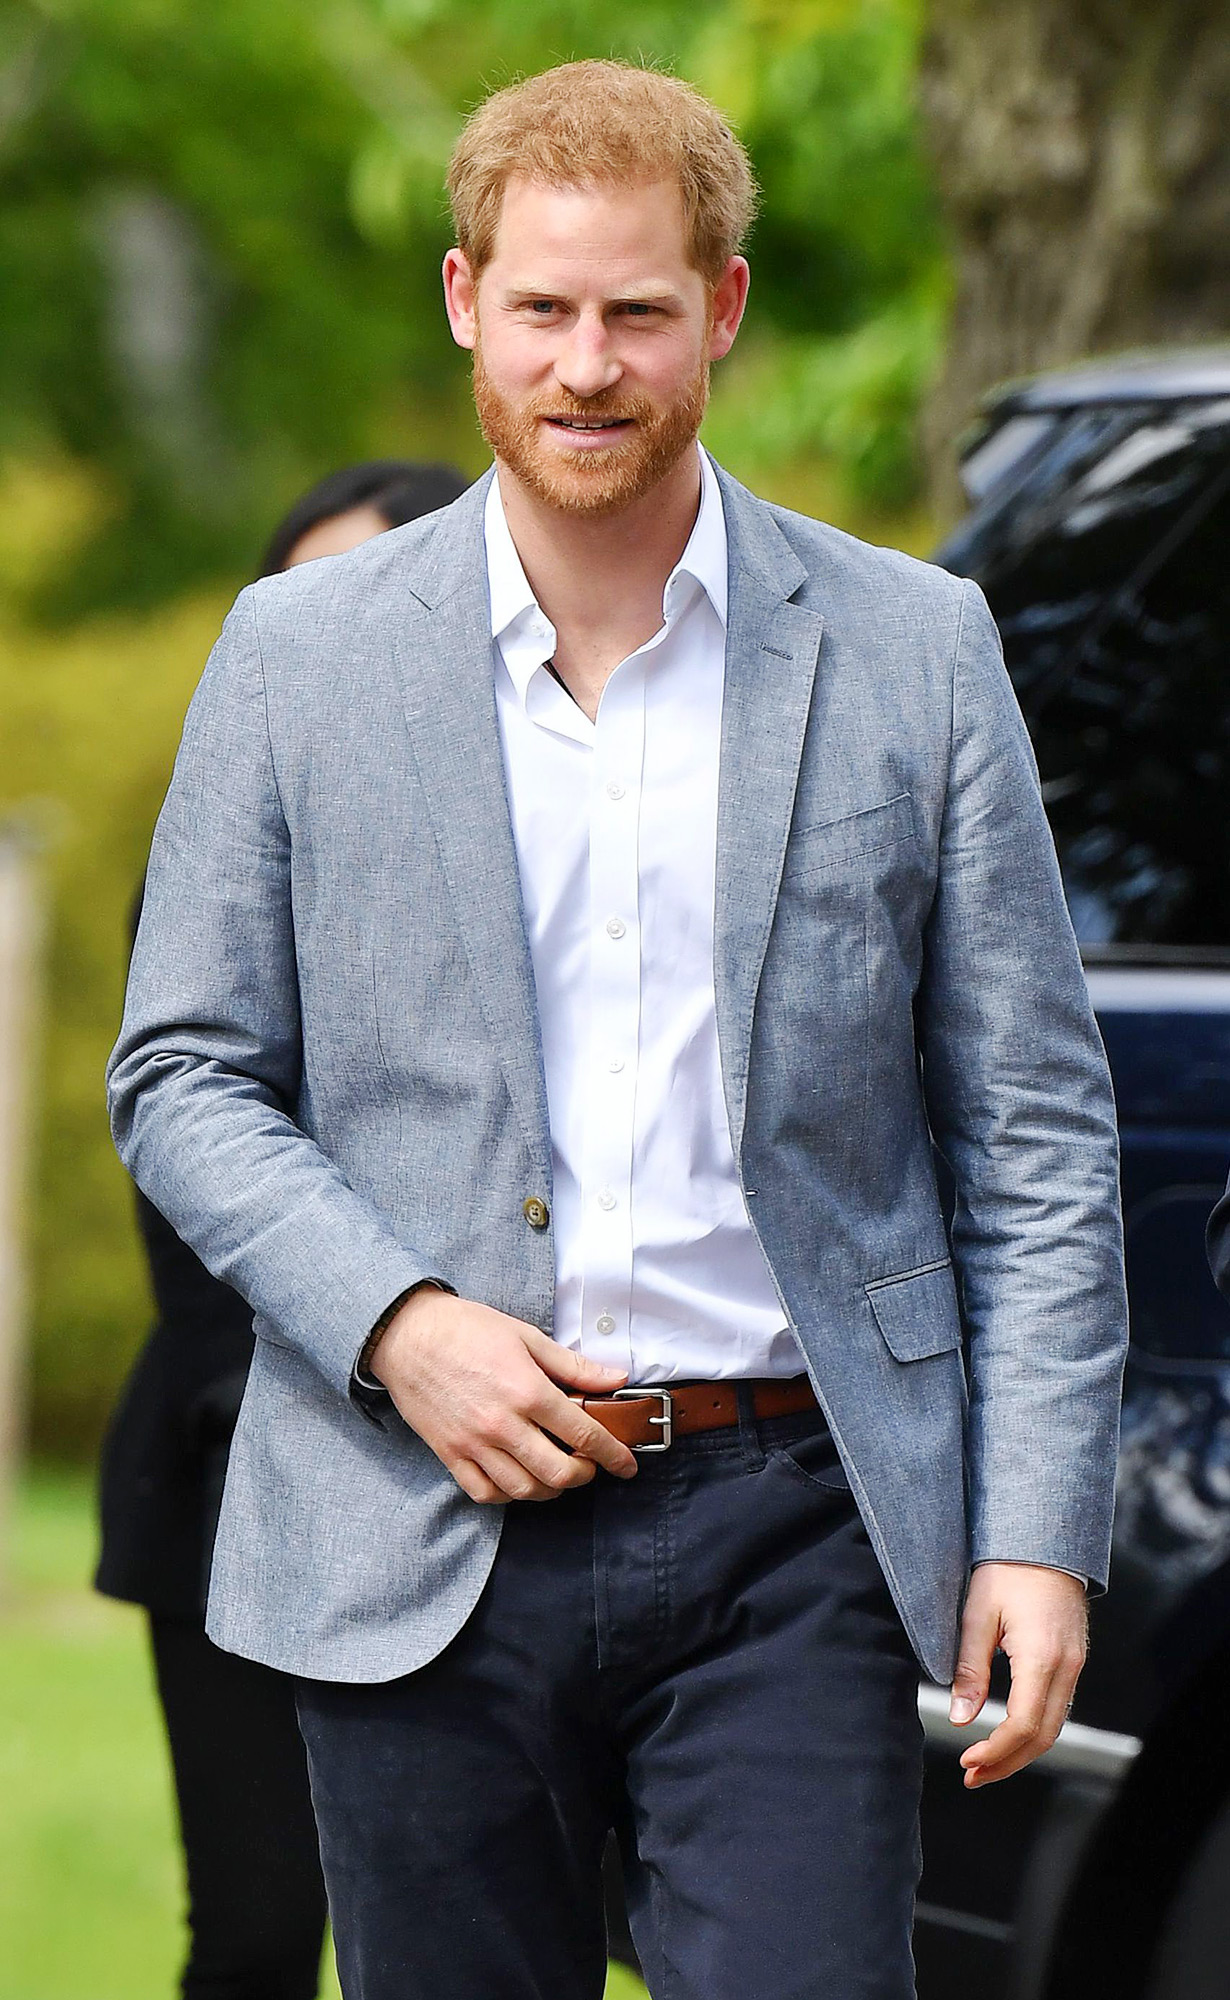 Prince Harry Doesn’t Believe He Is ‘Burning Bridges’ With His ‘Spare’ Memoir, Claims His ‘Problem’ Isn’t With the Monarchy - 880 Prince Harry visit to The Hague, Netherlands - 09 May 2019